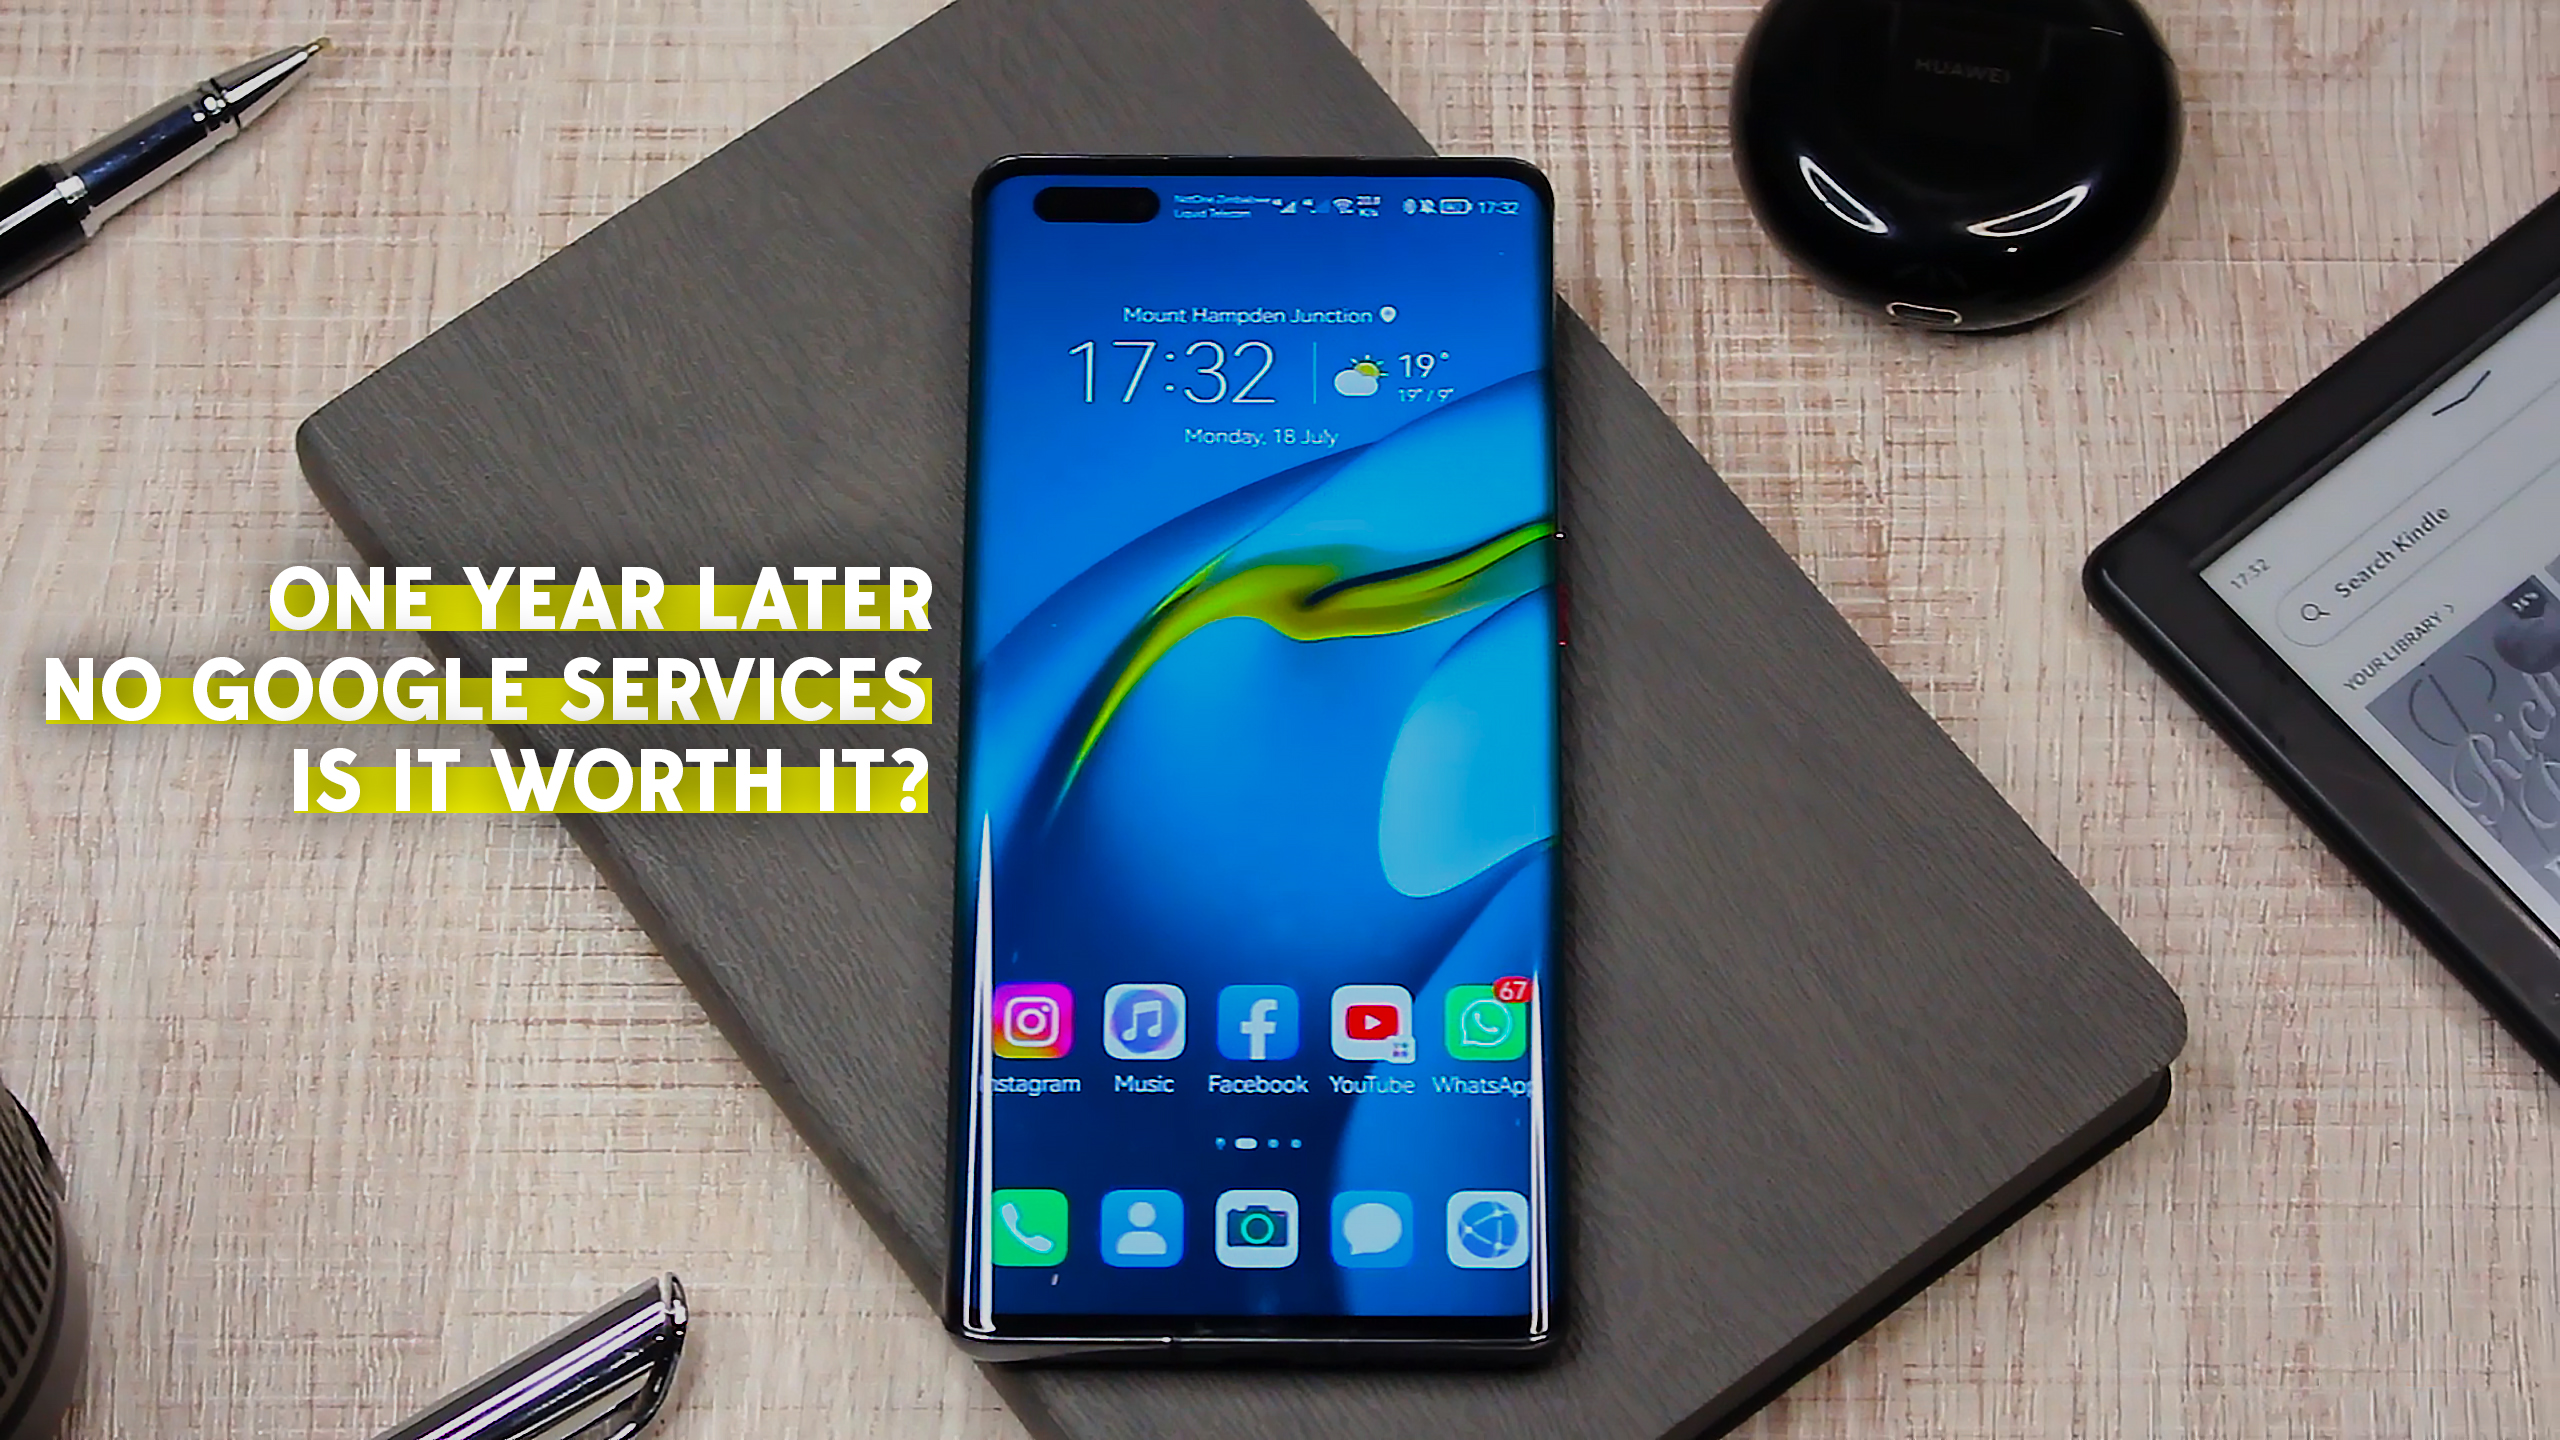 Honor Magic 3 is basically a Huawei phone but with Google apps